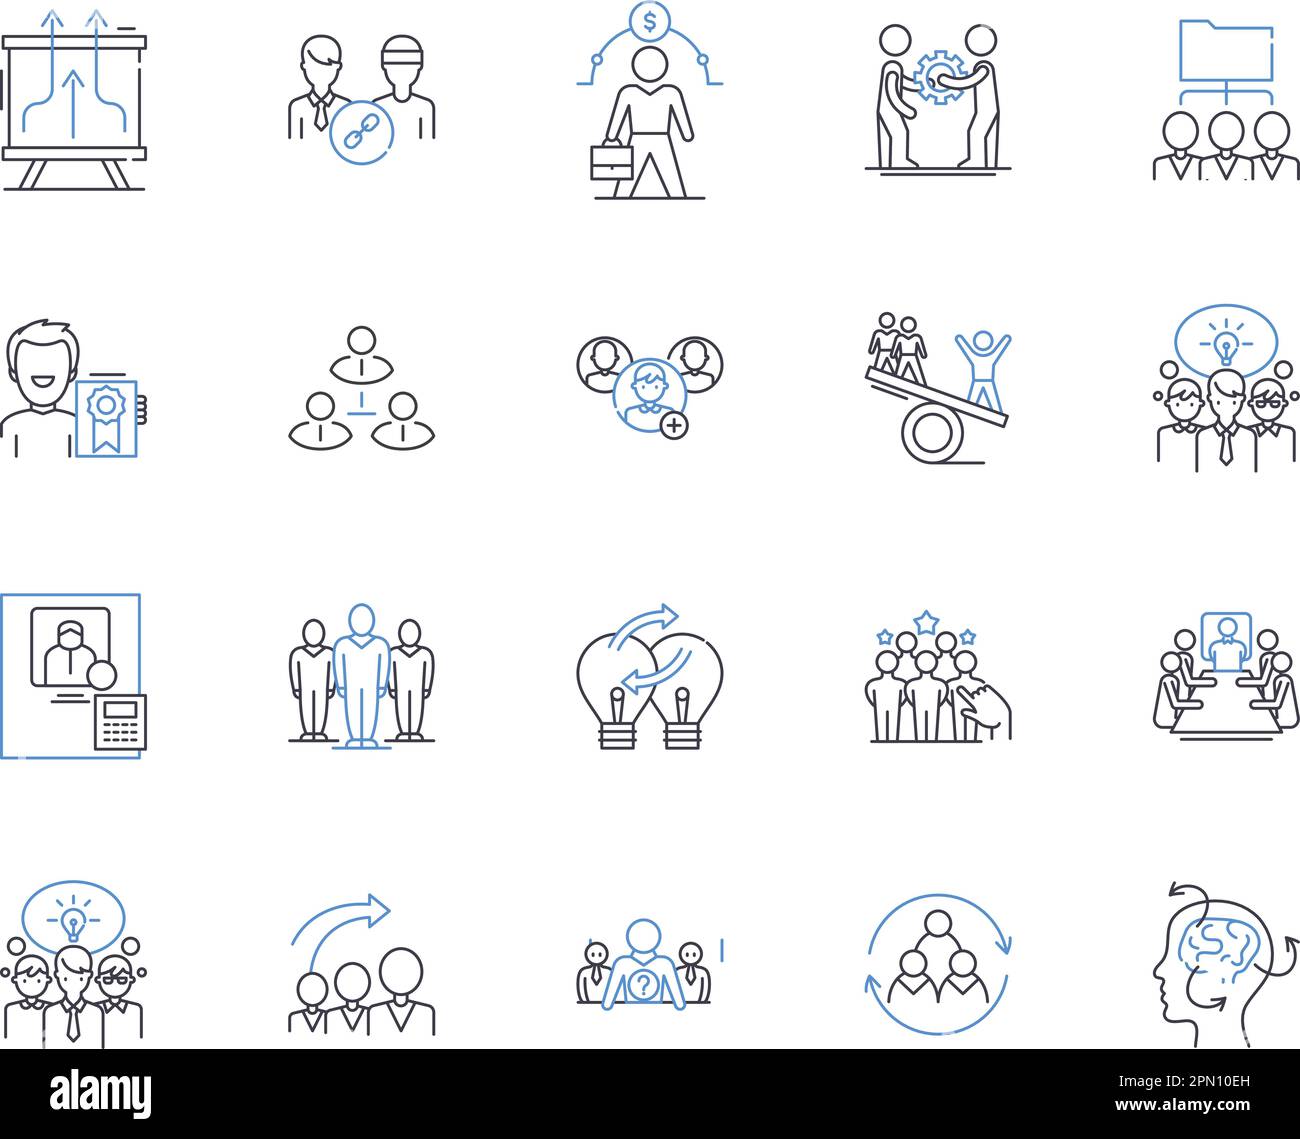 Corporate teambuilding outline icons collection. Corporate, Teambuilding, Retreat, Exercise, Building, Recreational, Activity vector and illustration Stock Vector